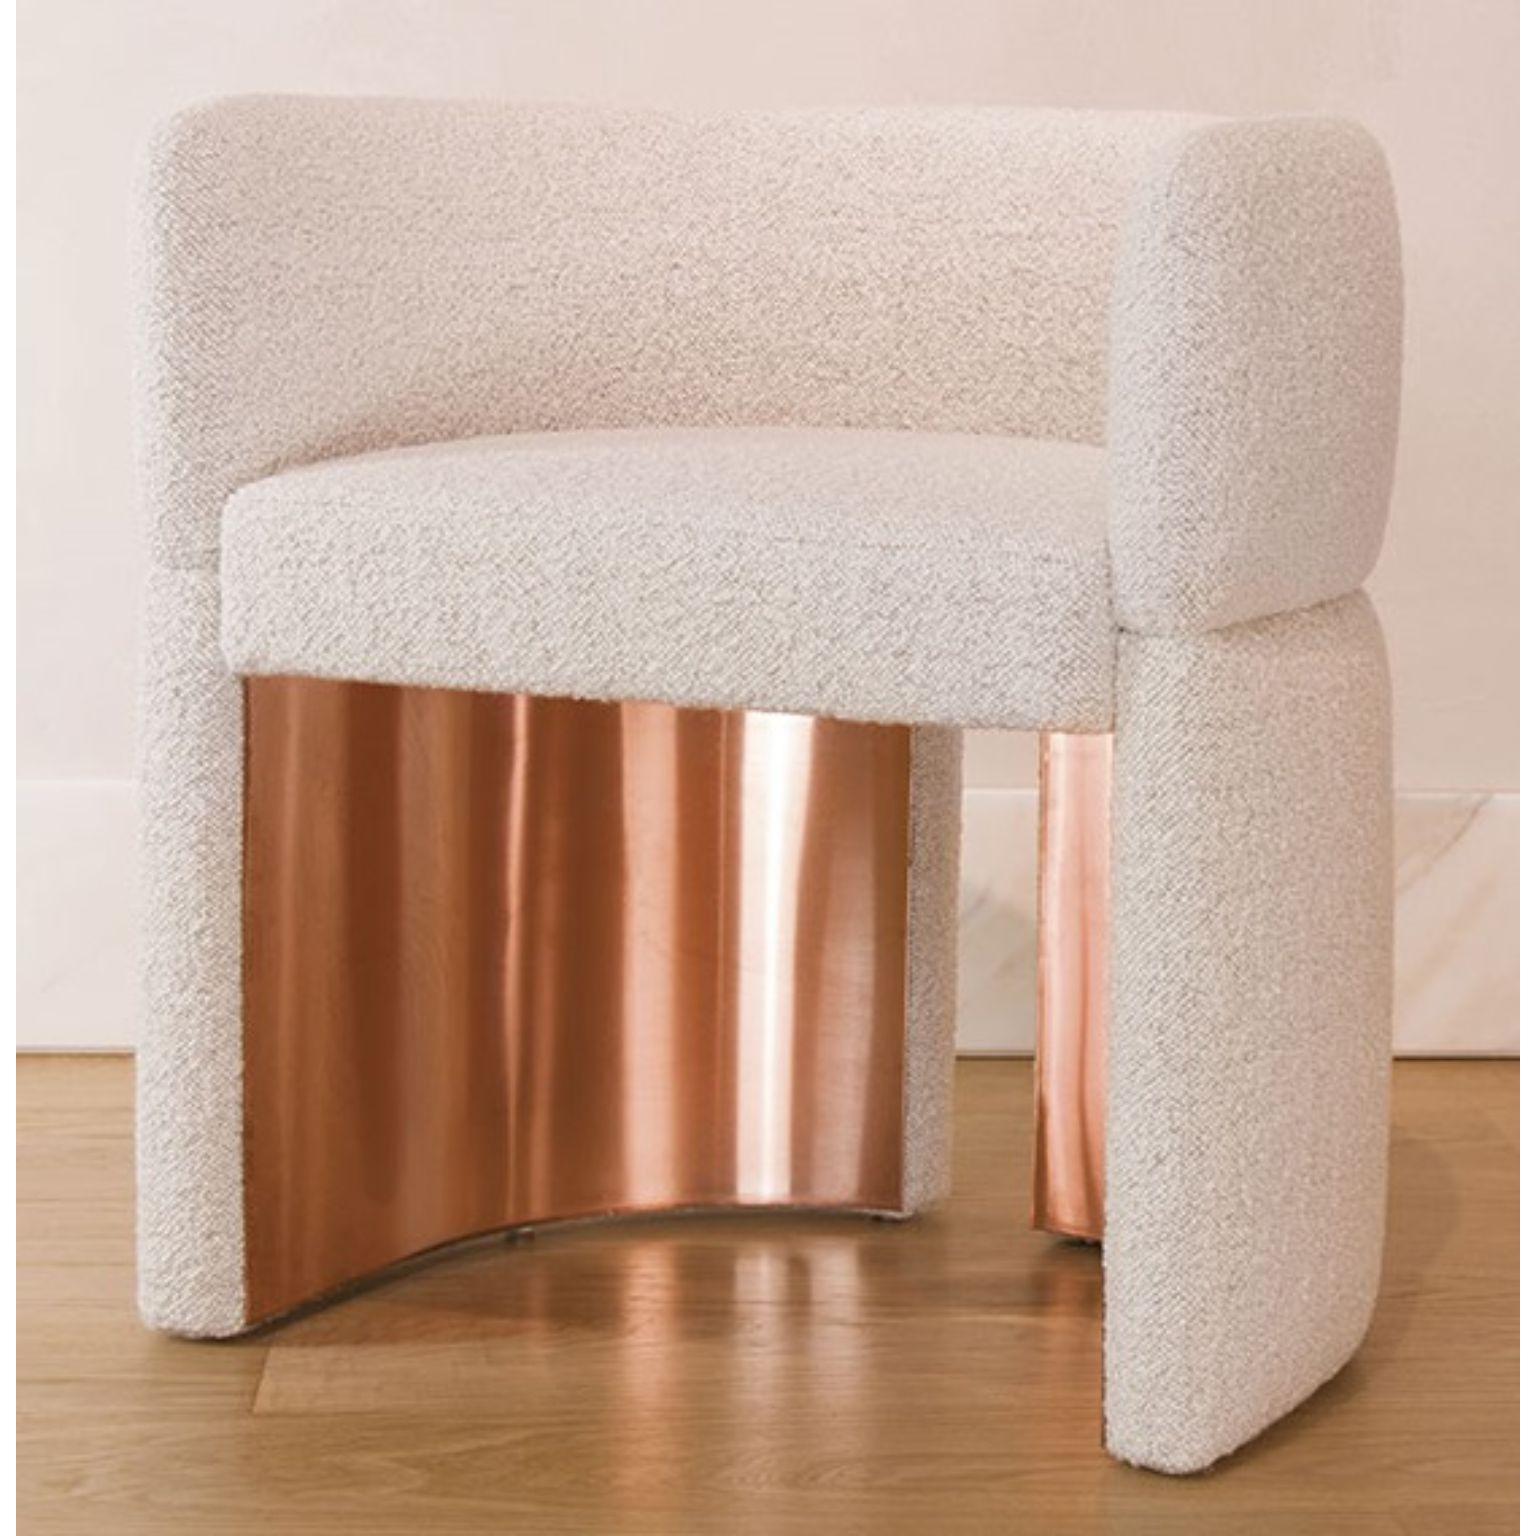 Eclisse Easy Armchair by Andrea Bonini
Limited Edition
Dimensions: D 21 x W 62 x H 70 cm.
Materials: Bouclè fabric and copper.

Made in Italy. Limited series, numbered and signed pieces. Custom size or finish on request.  Please contact us.

The aim